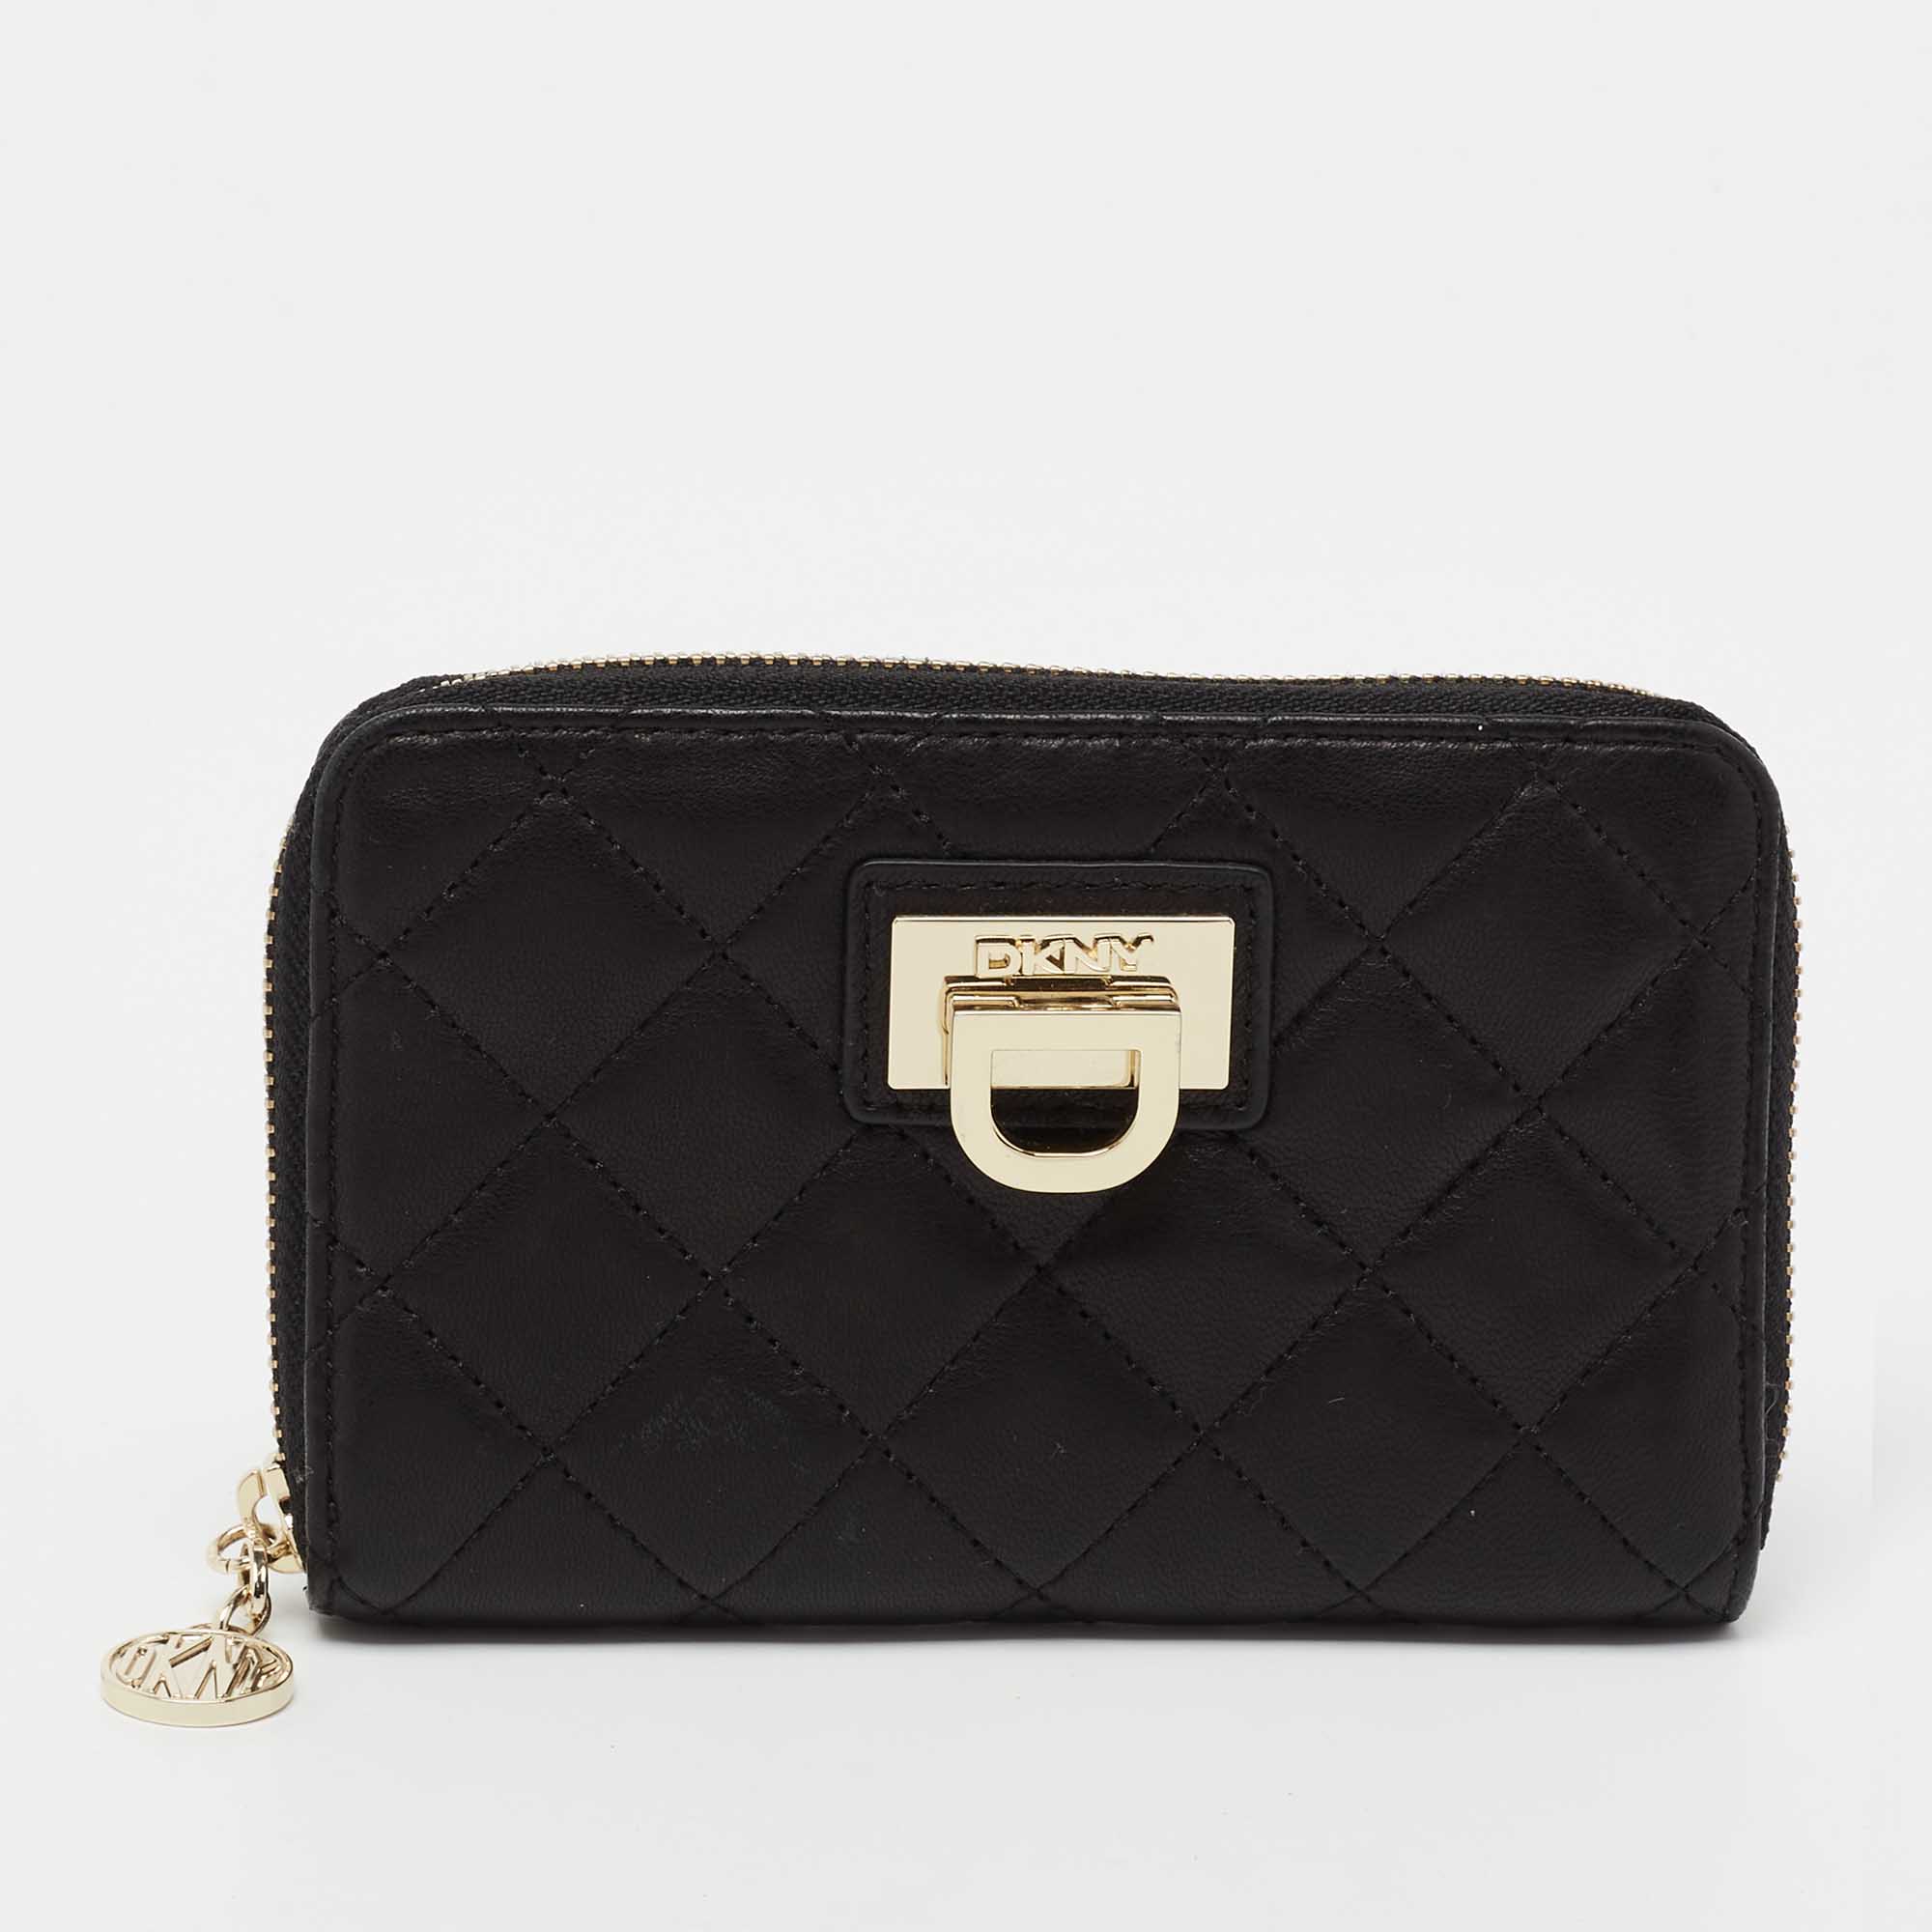 DKNY Quilted Leather Small Flap Crossbody, $158, DKNY